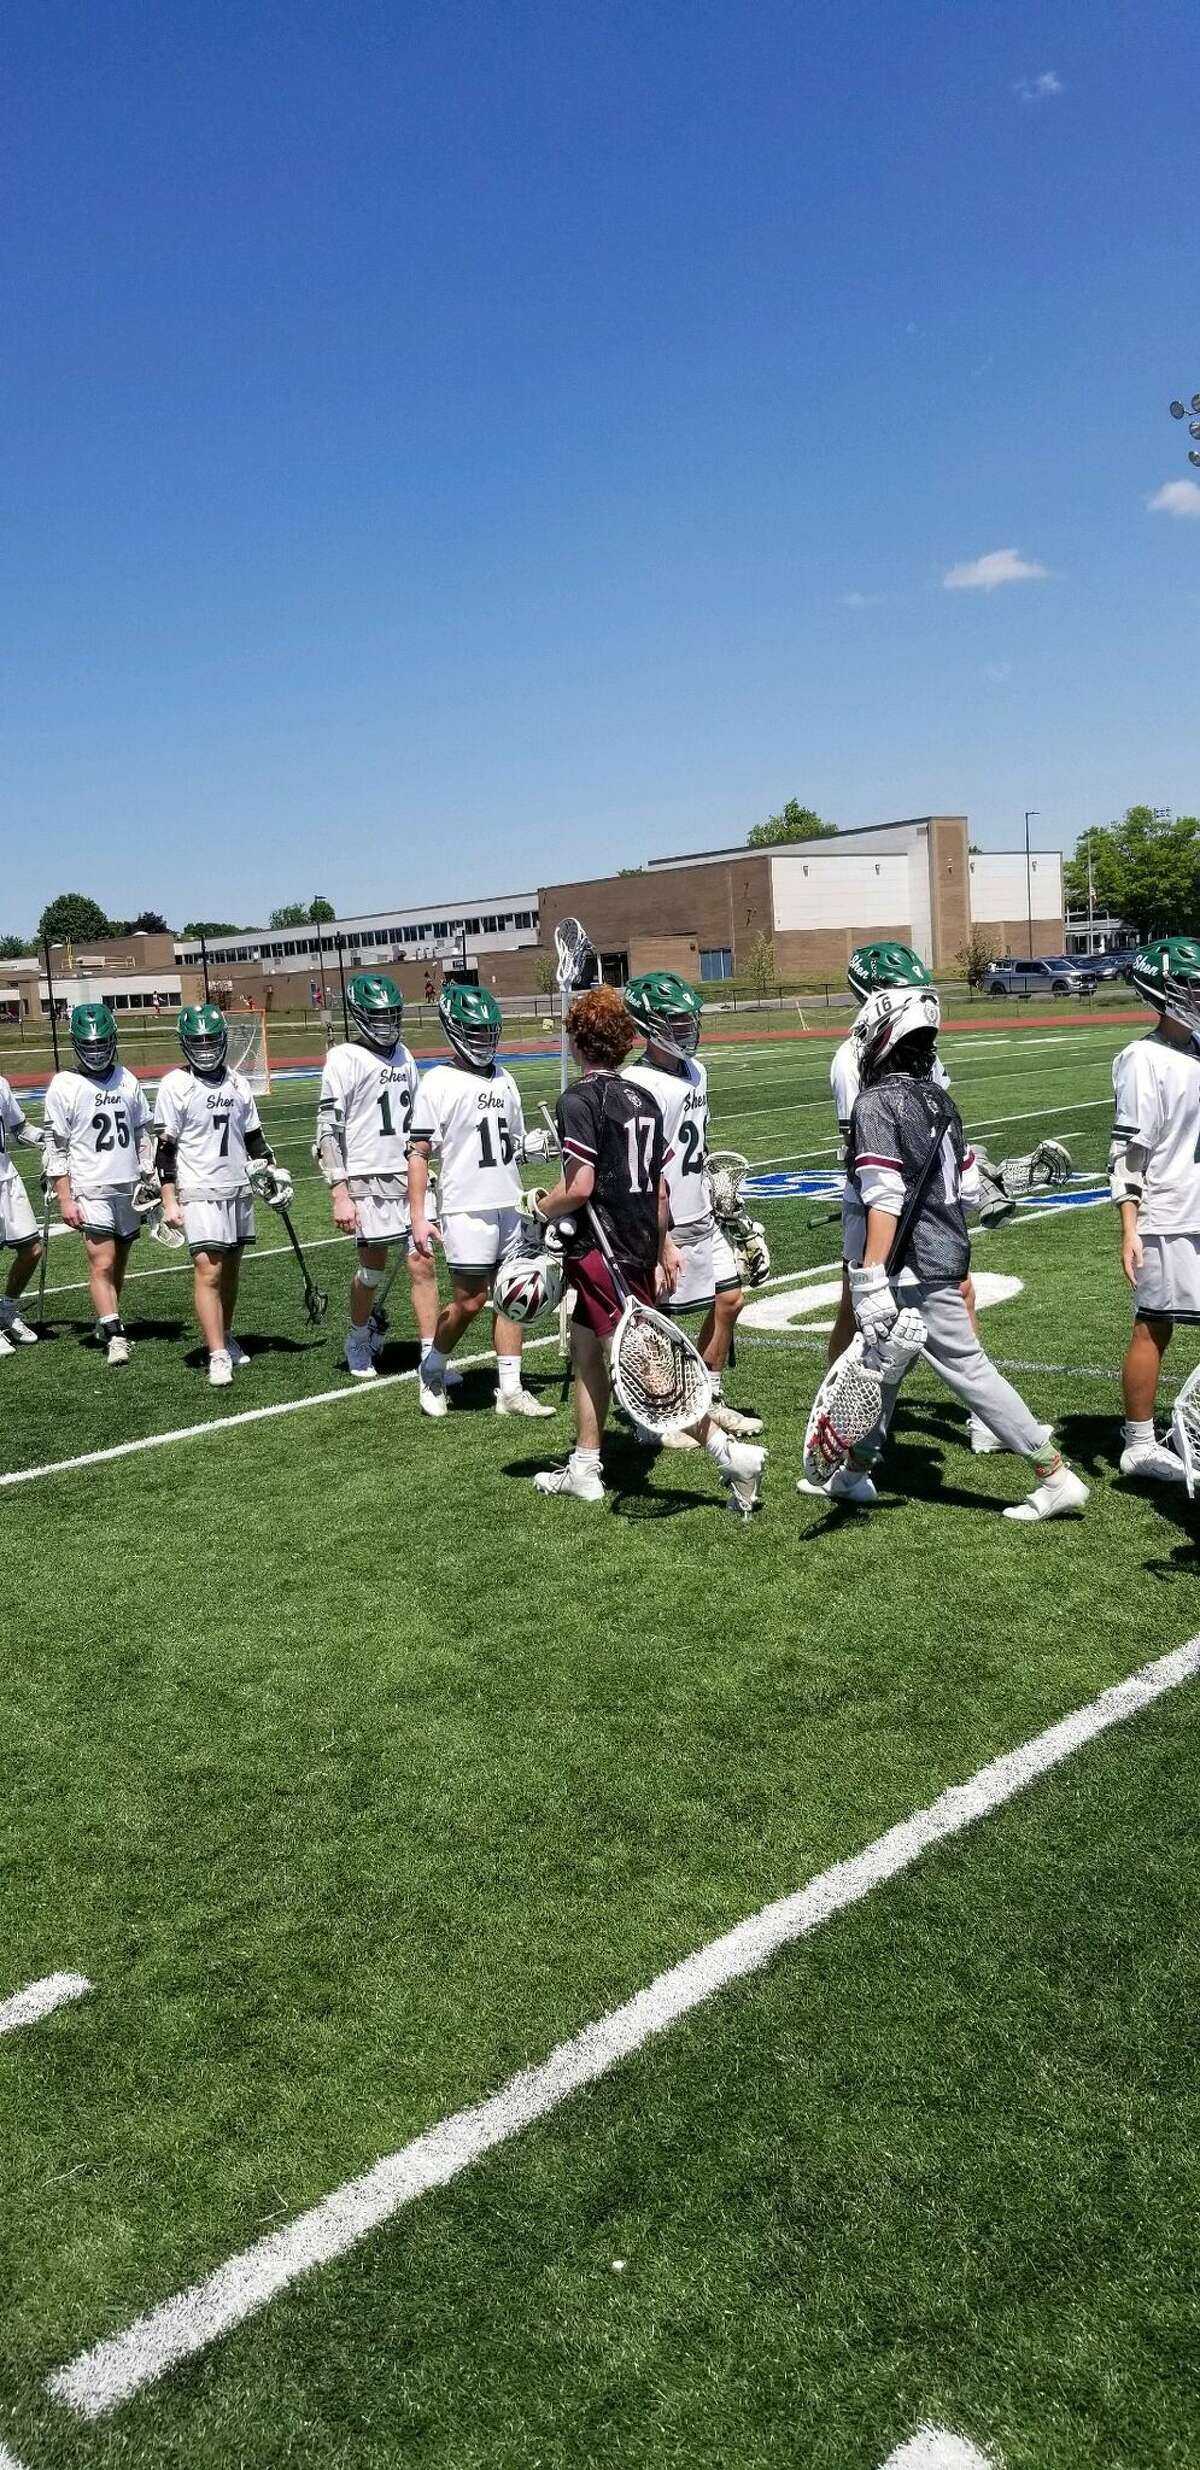 Shenendehowa and Scarsdale players shake hands after Scarsdale's victory in the Class A state quarterfinals at Shaker High School on Saturday, June 4, 2022.